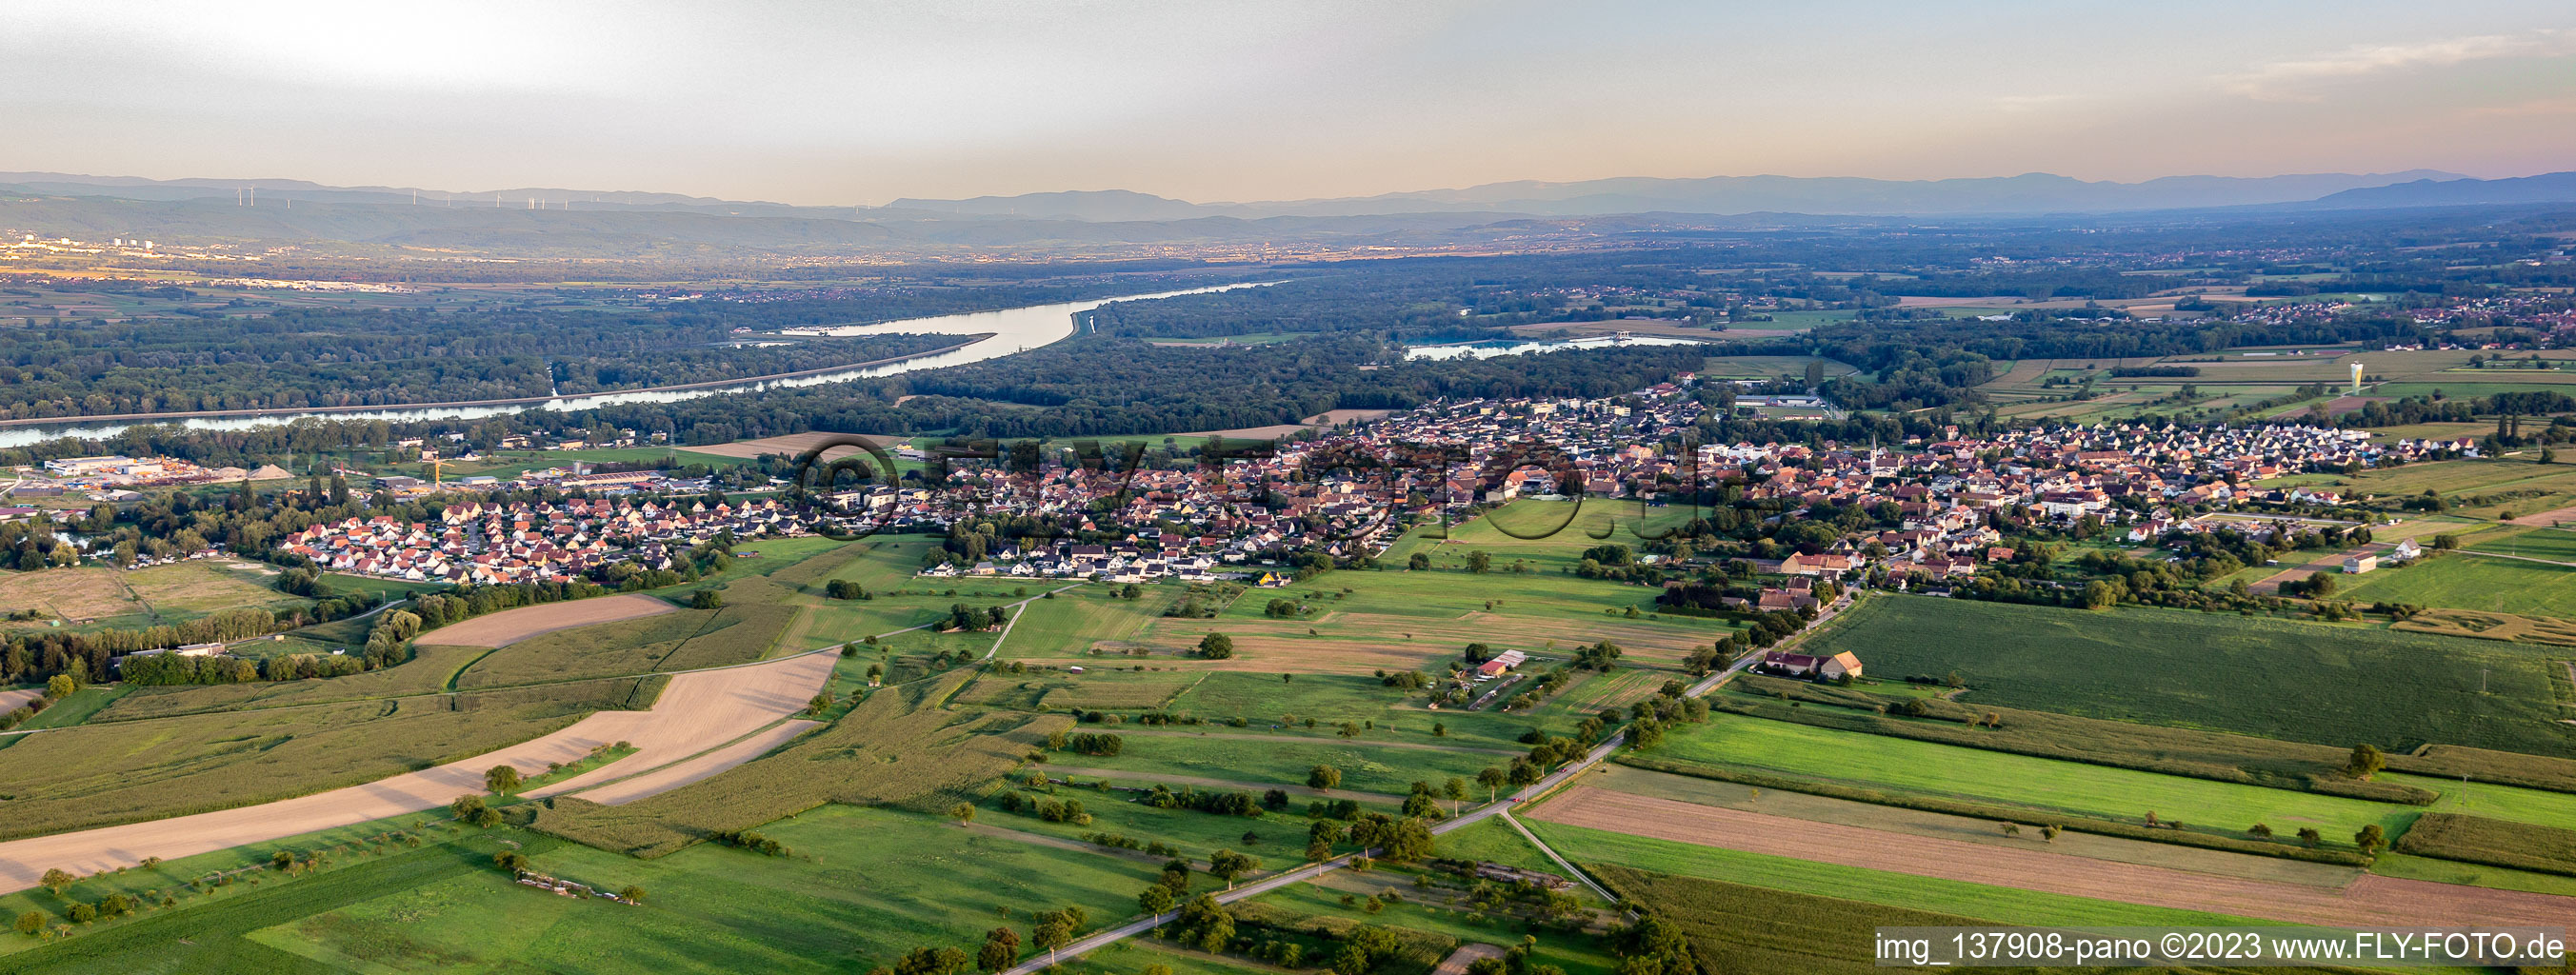 Aerial view of Panorama in Gerstheim in the state Bas-Rhin, France